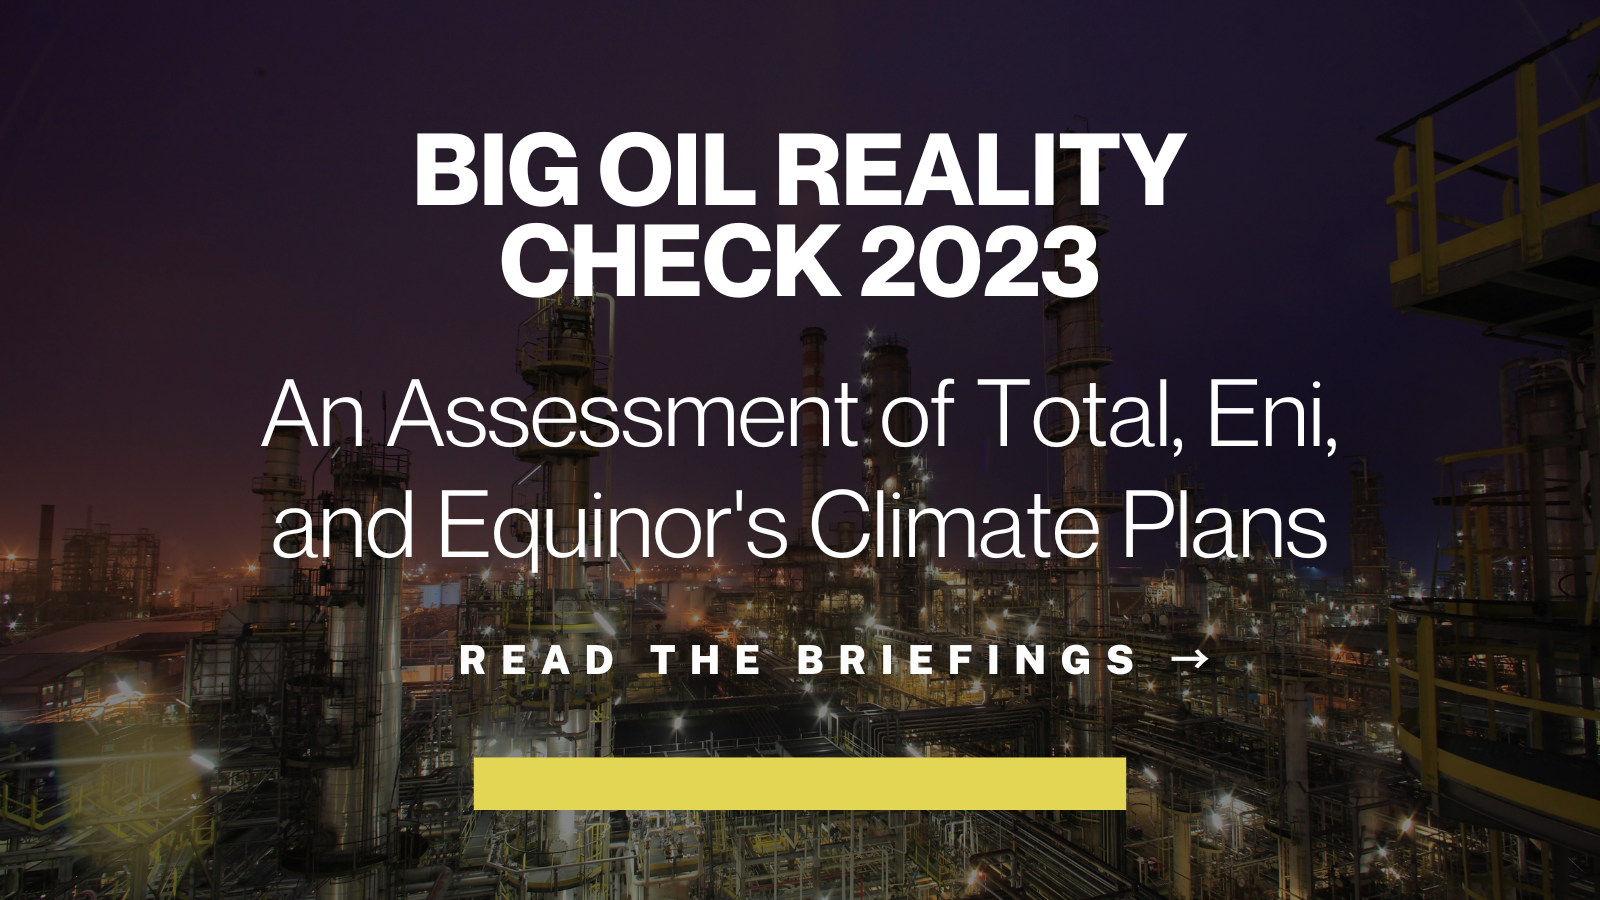 Big Oil Reality Check 2023 — An Assessment of TotalEnergies, Eni, and Equinor’s Climate Plans